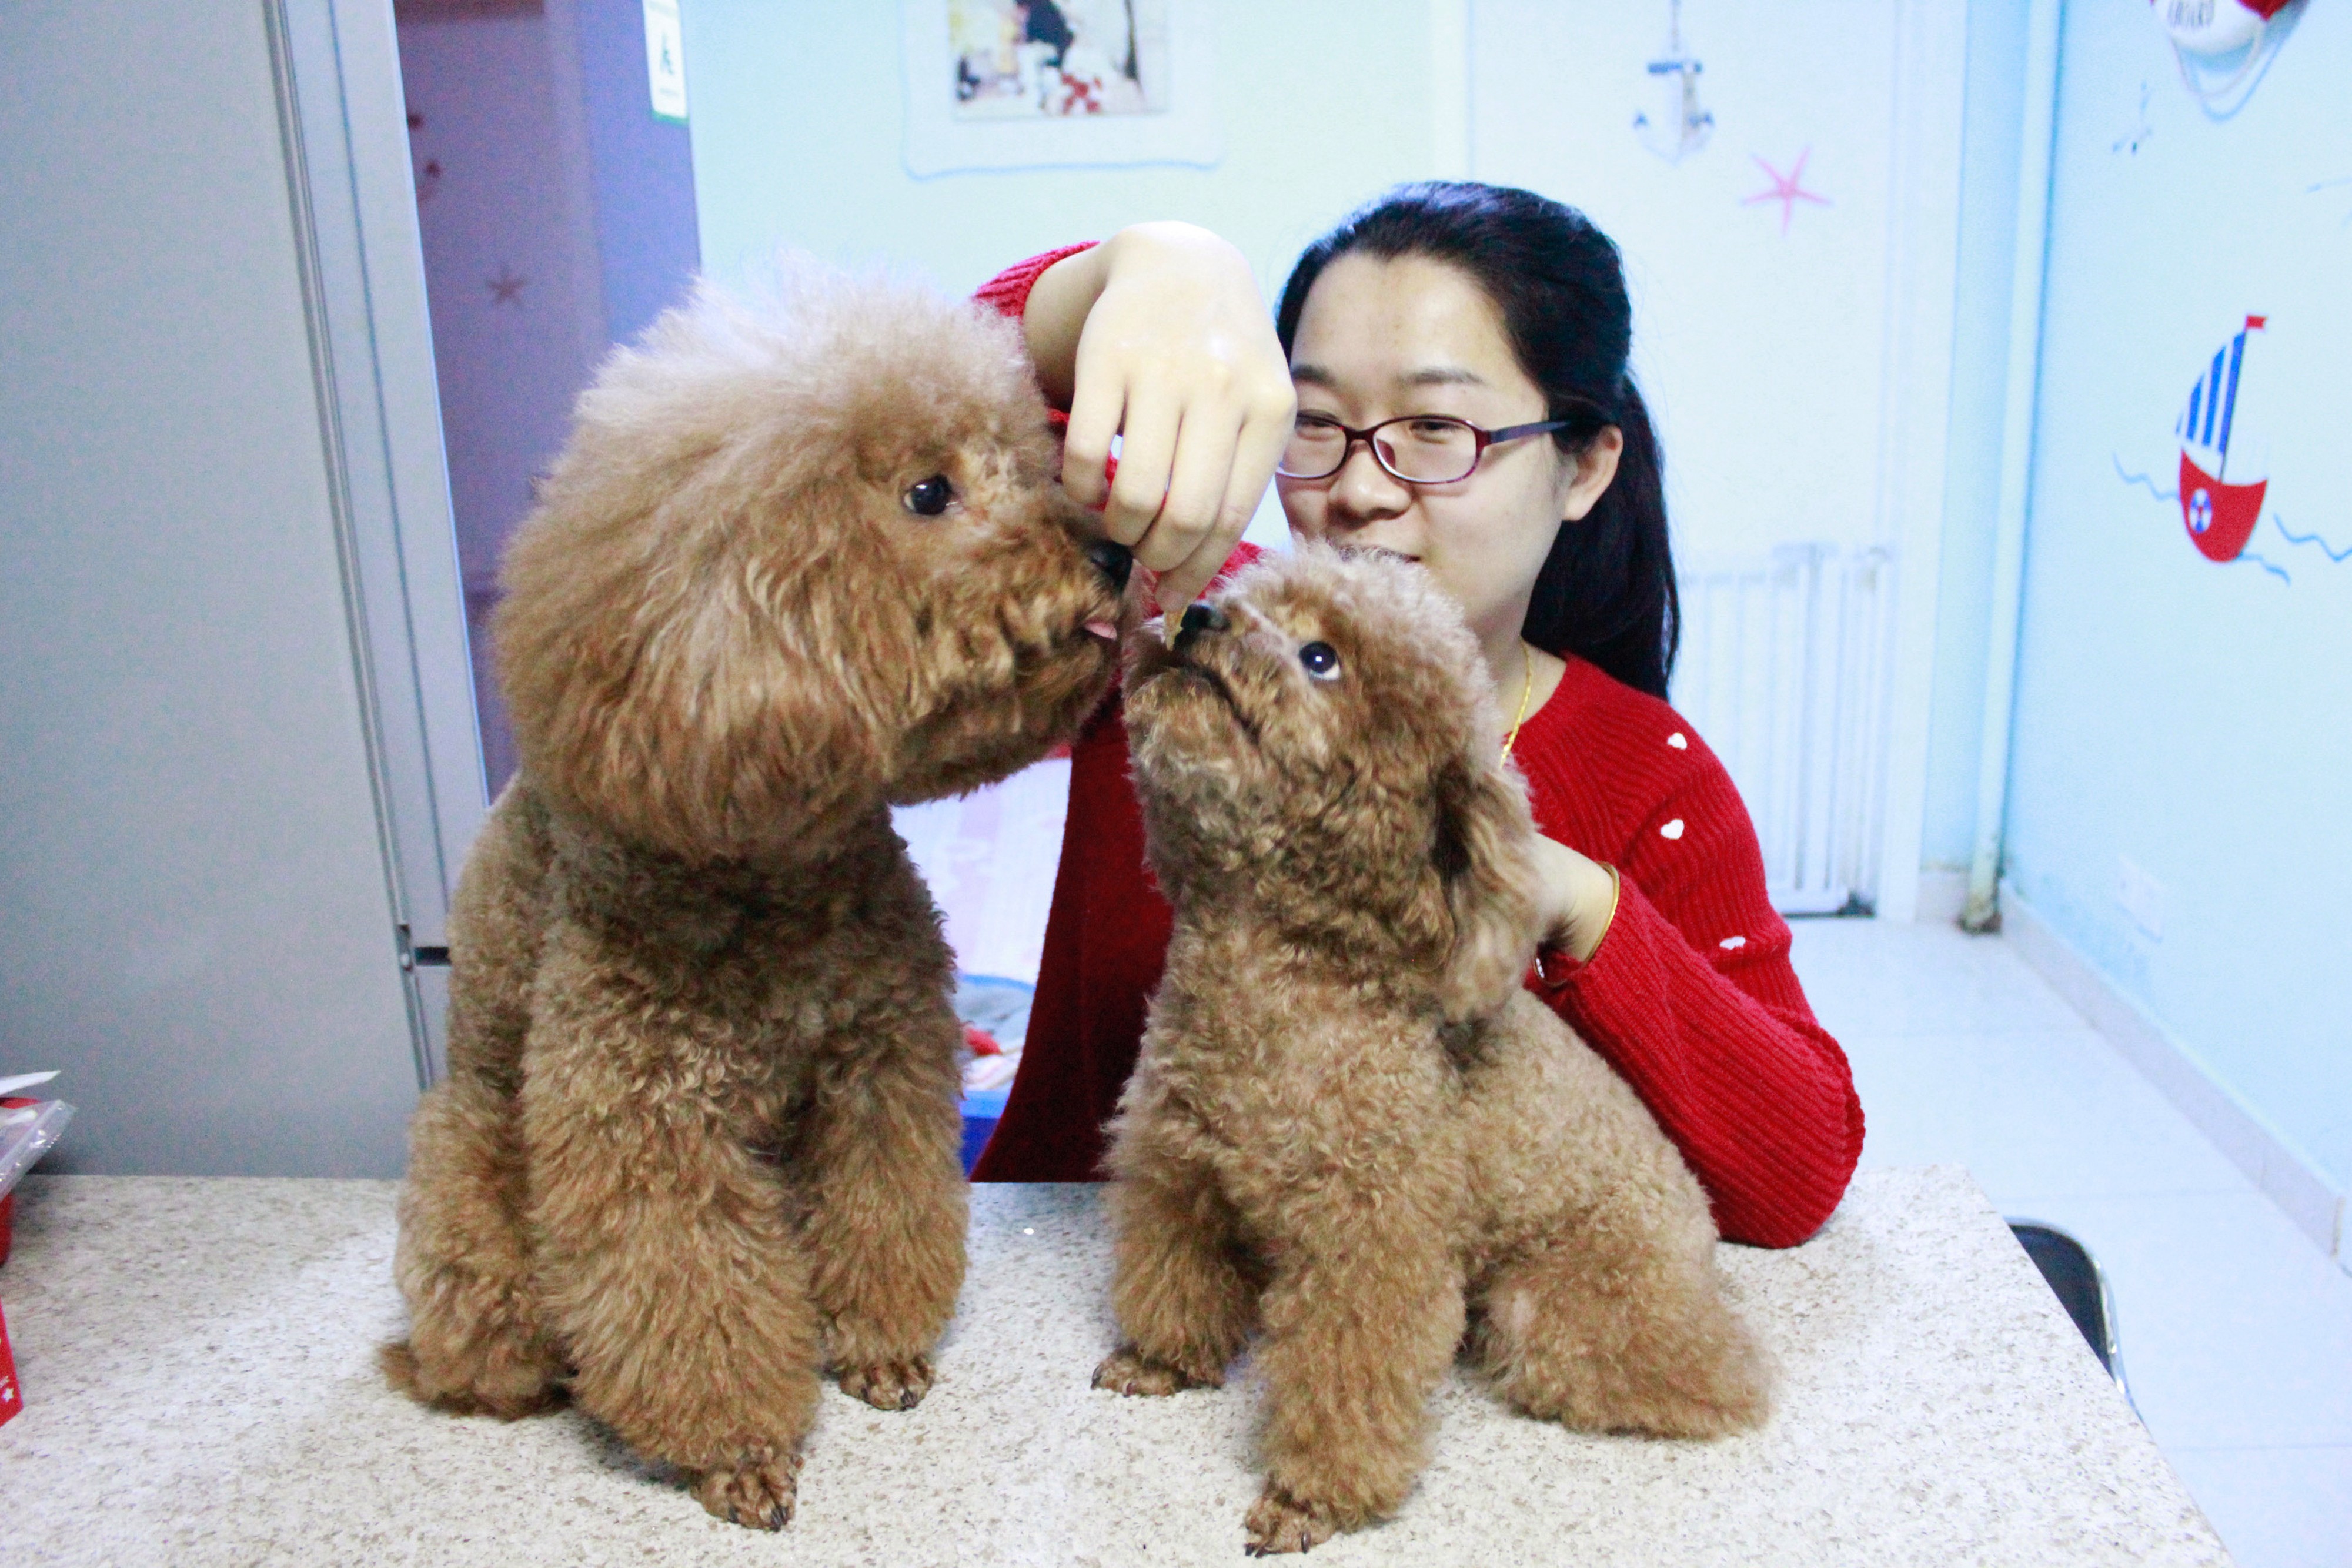 Beijing kindergarten teacher Xu Yingying enjoys taking care of guest dogs as well as her own teddy bear dog. Photo: SCMP Pictures